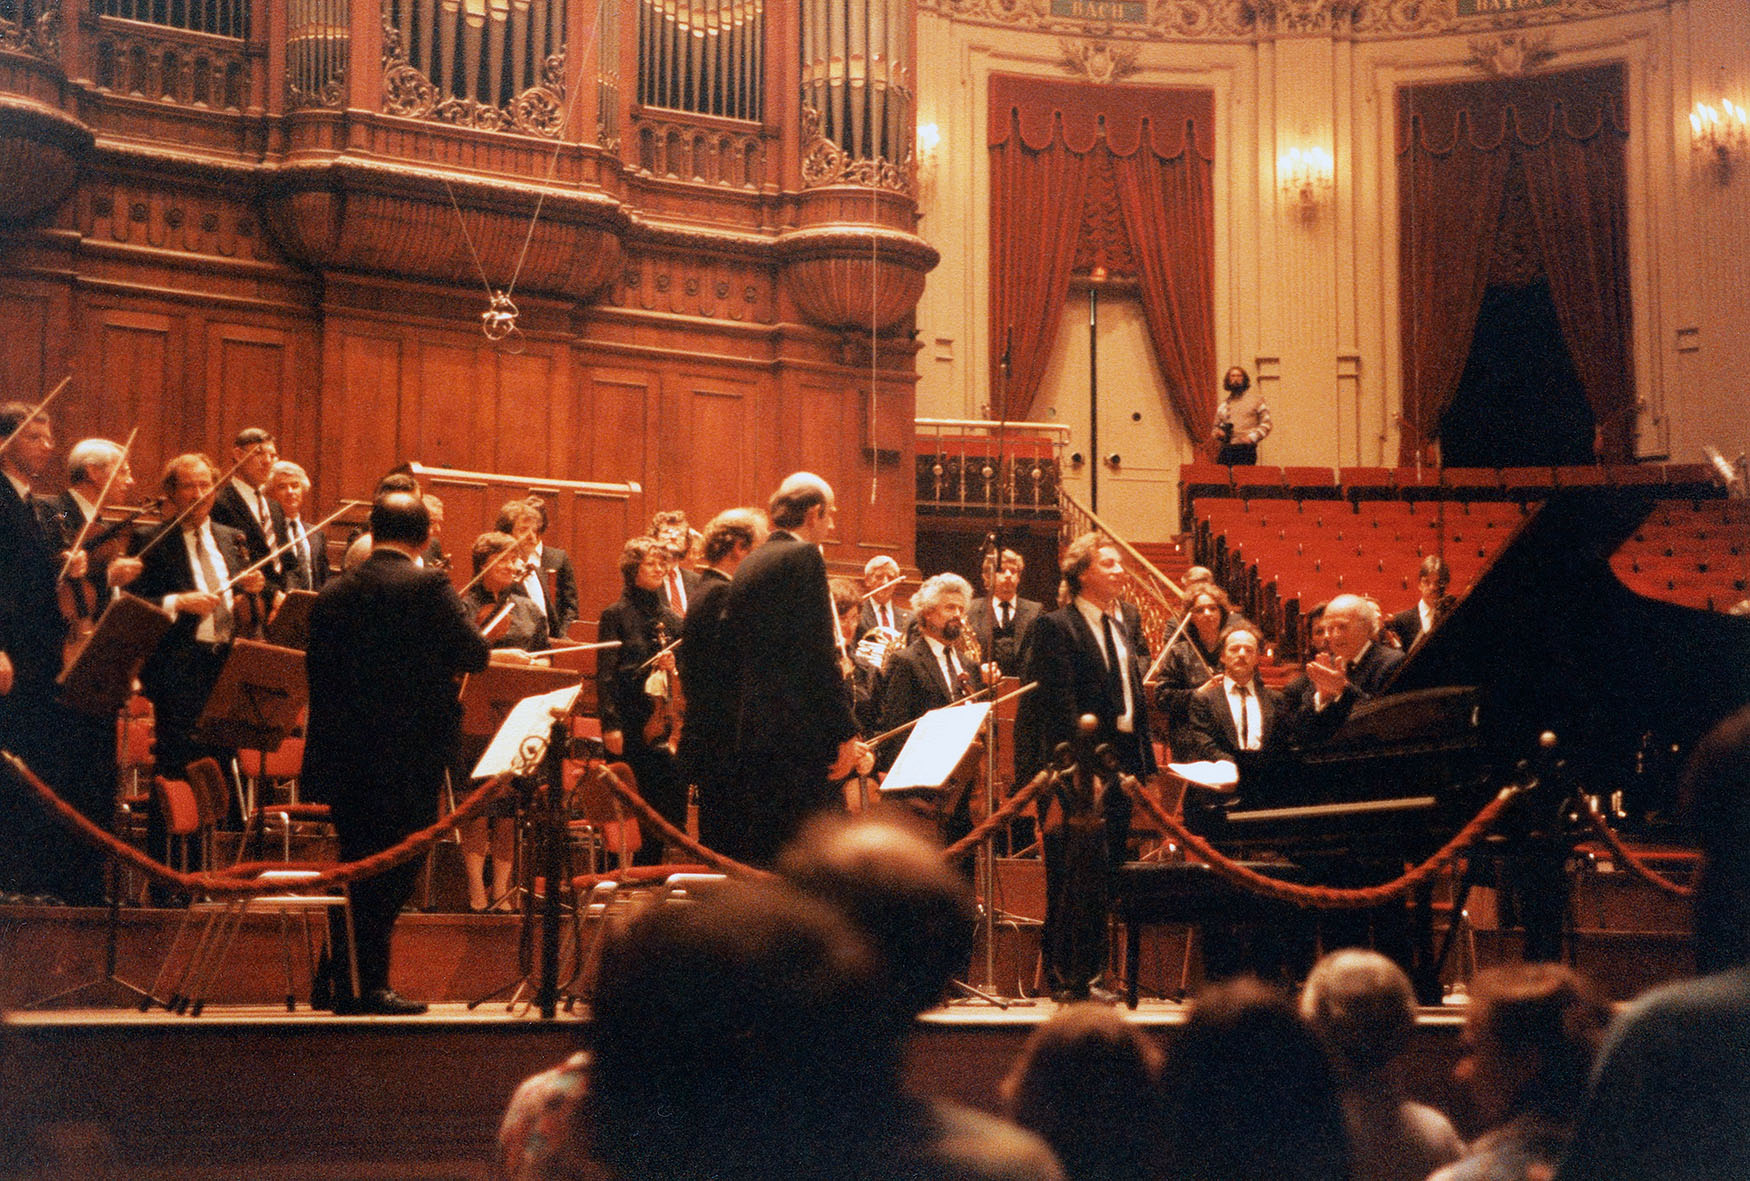 Recorded concert of a Beethoven program with The Netherlands Radio Chamber Orchestra, Ernest Bour conducting. Concertgebouw Amsterdam, 1985